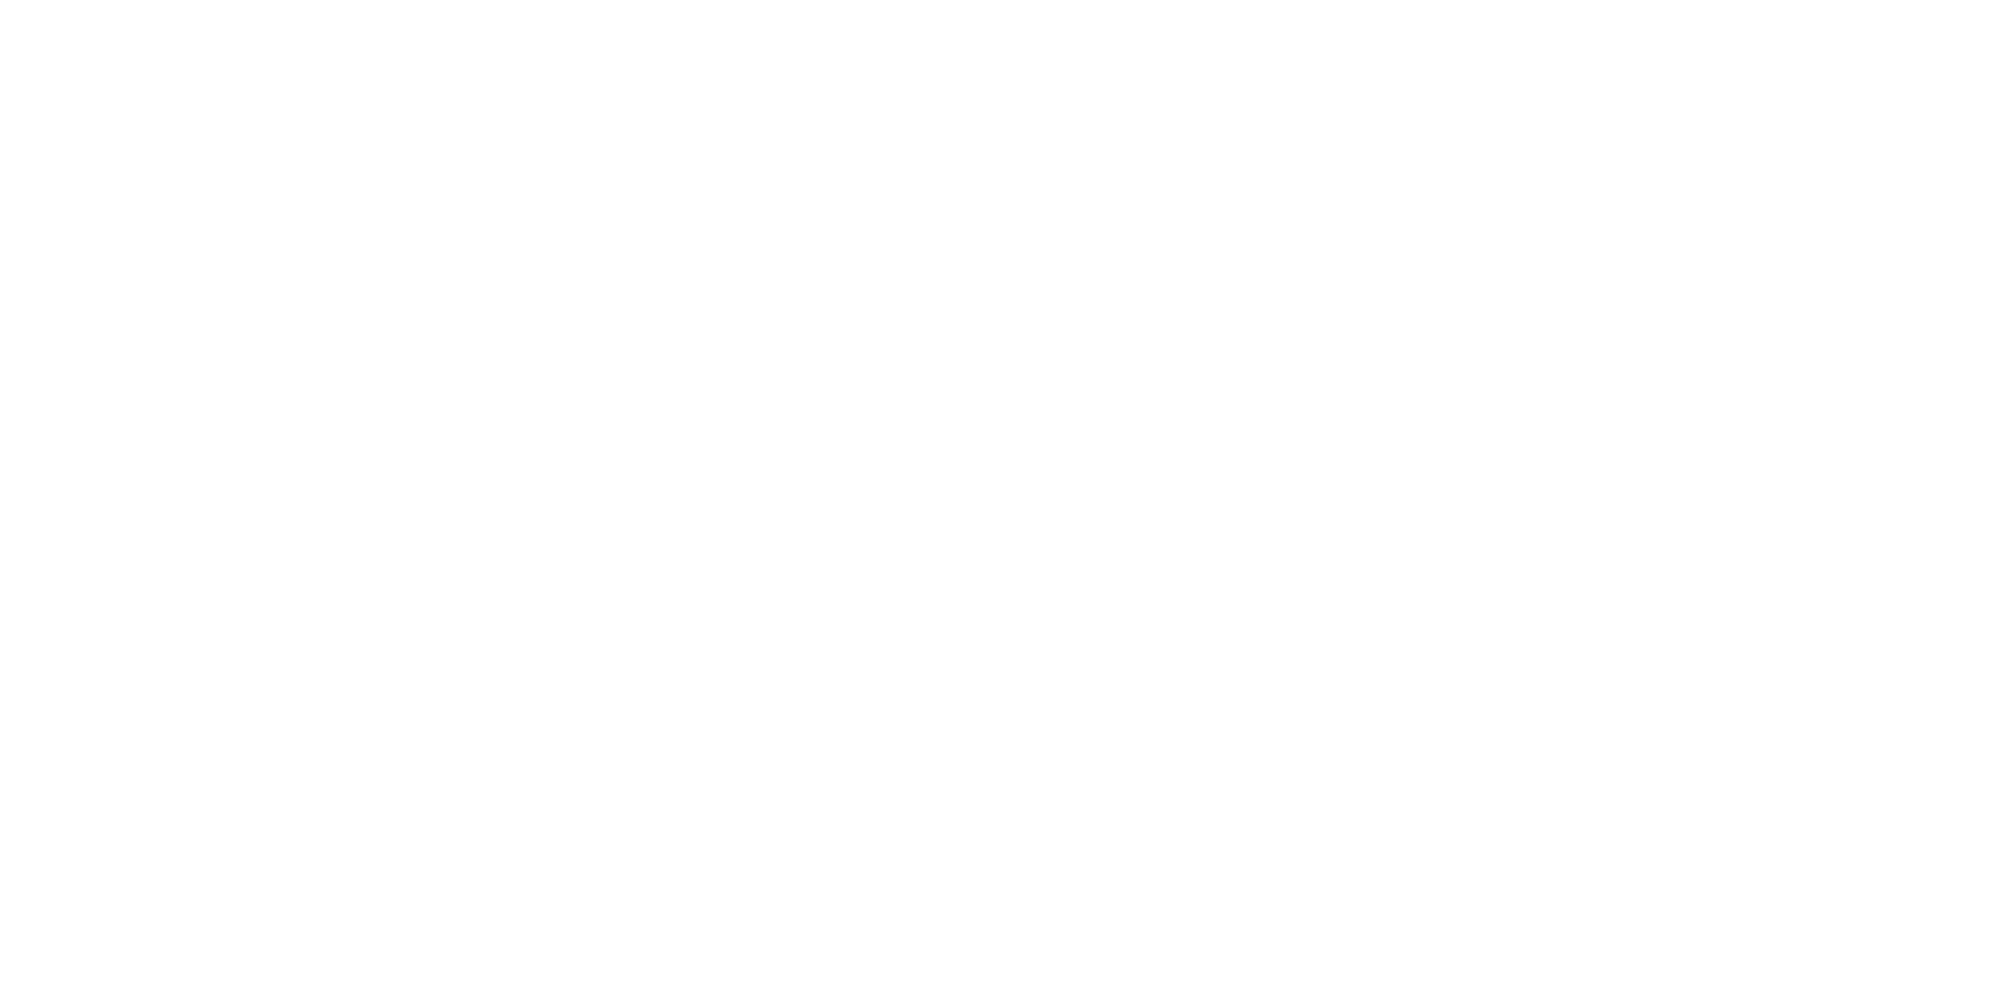 Las Vegas Convention and Visitors Authority logo